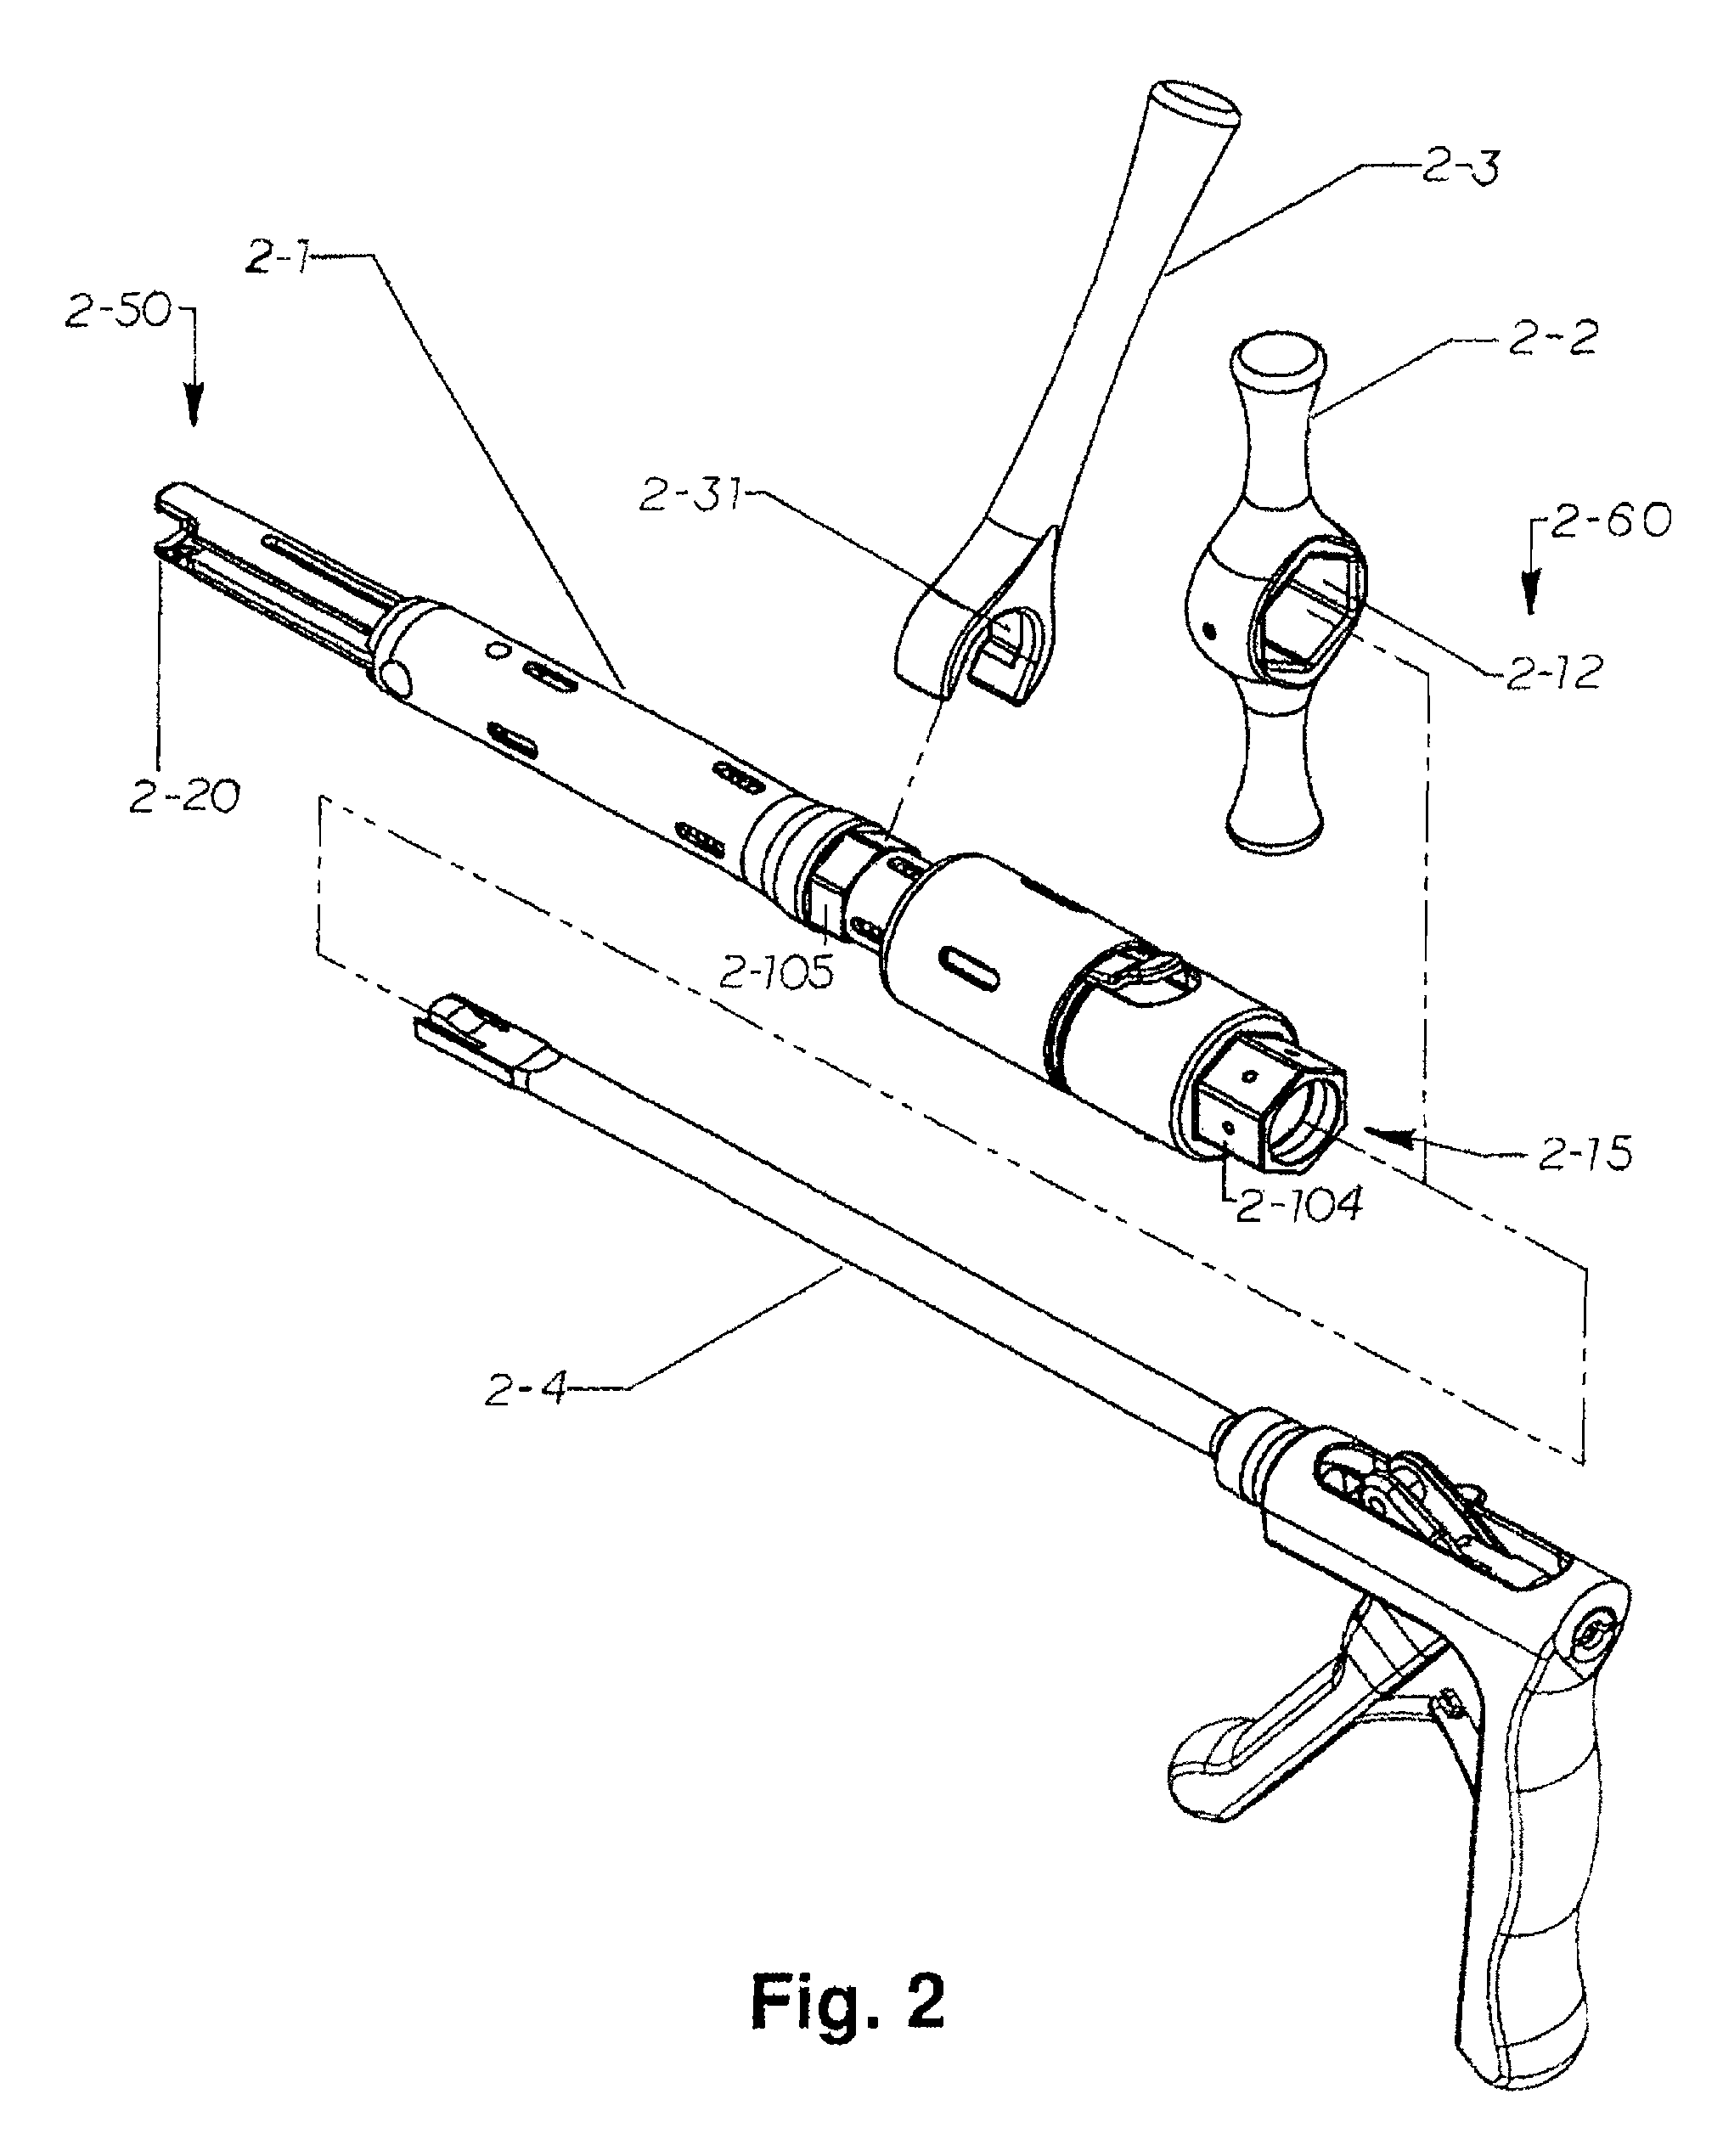 Spinal rod reducer and cap insertion apparatus